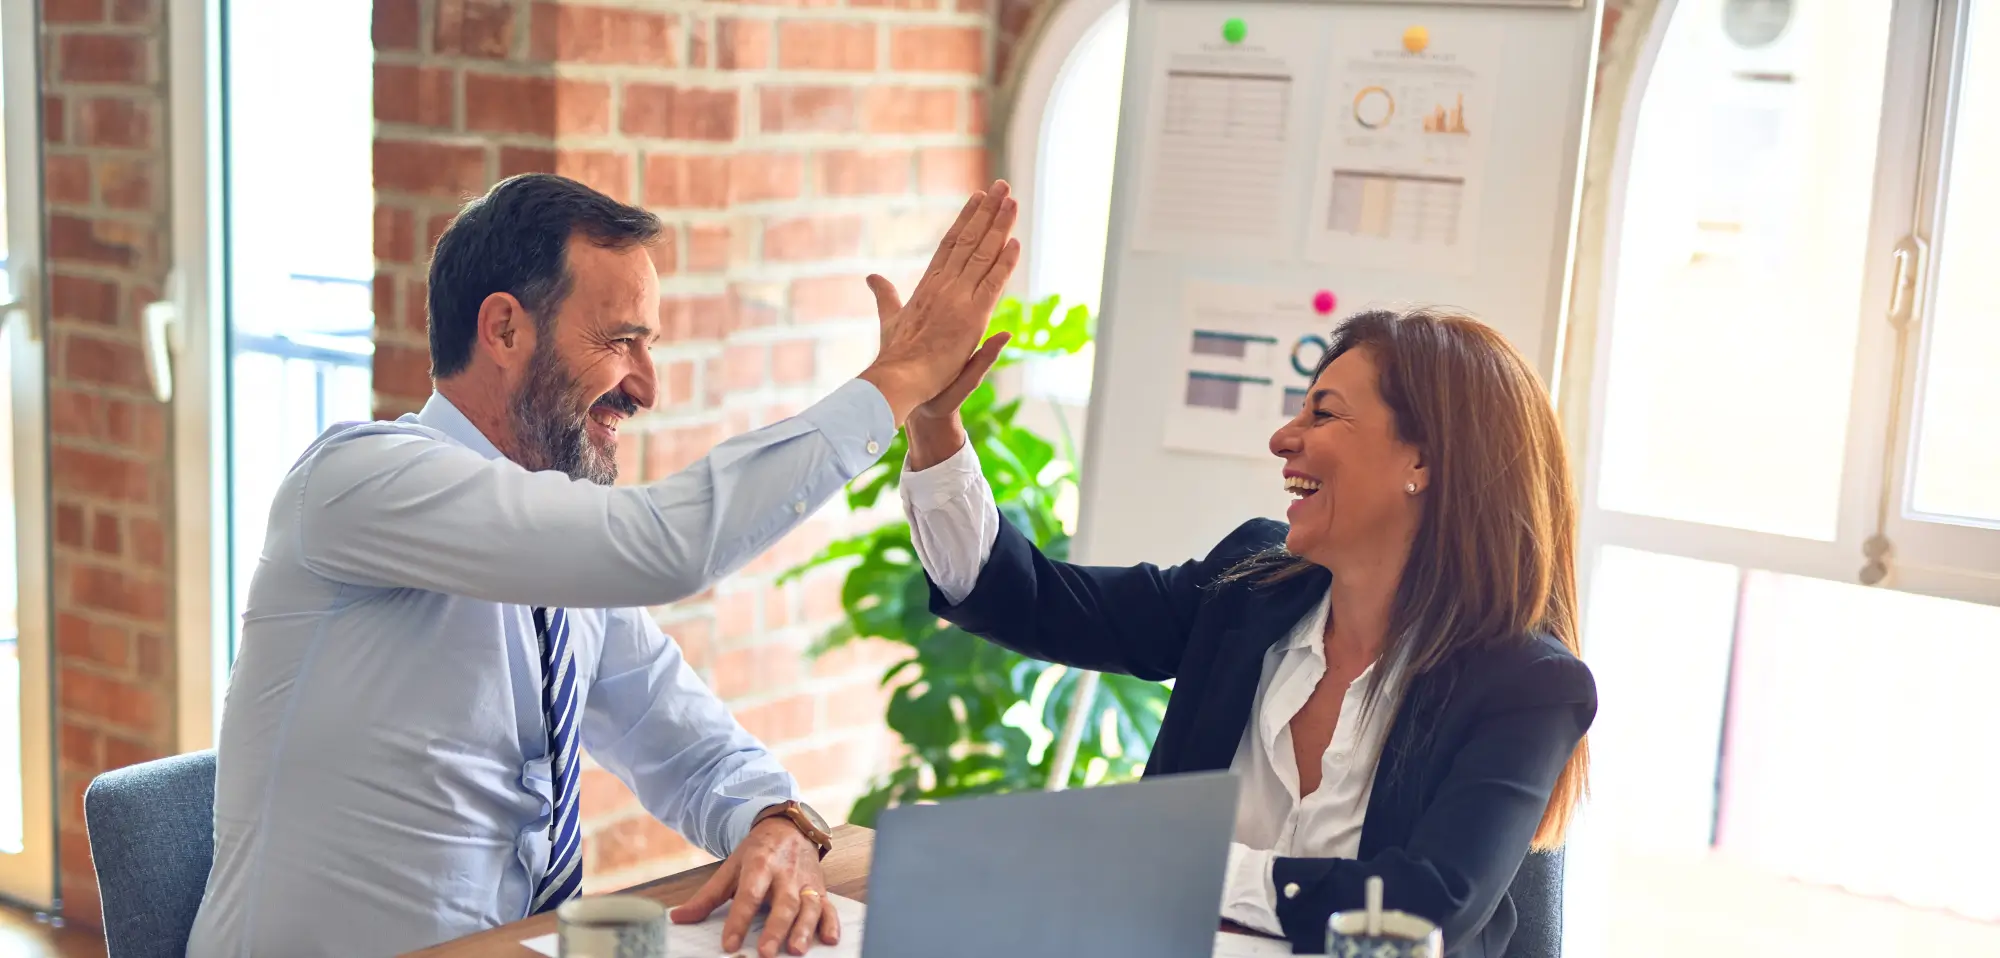 Woman high-fiving a man during a business meeting